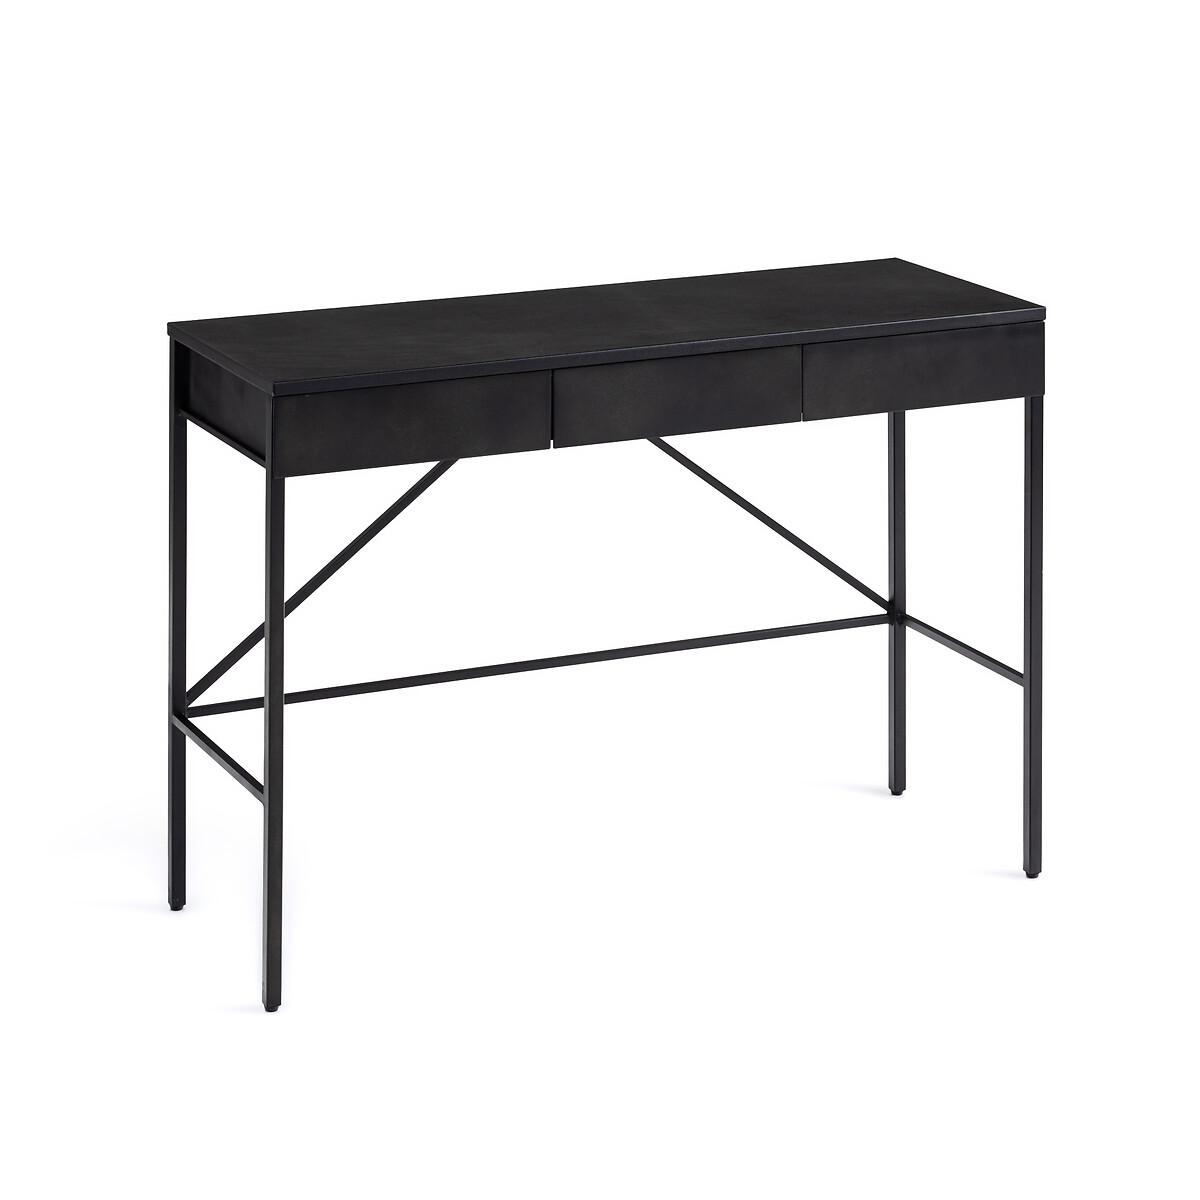 Febee Console Table With Leather Top, Black Leather Console Table